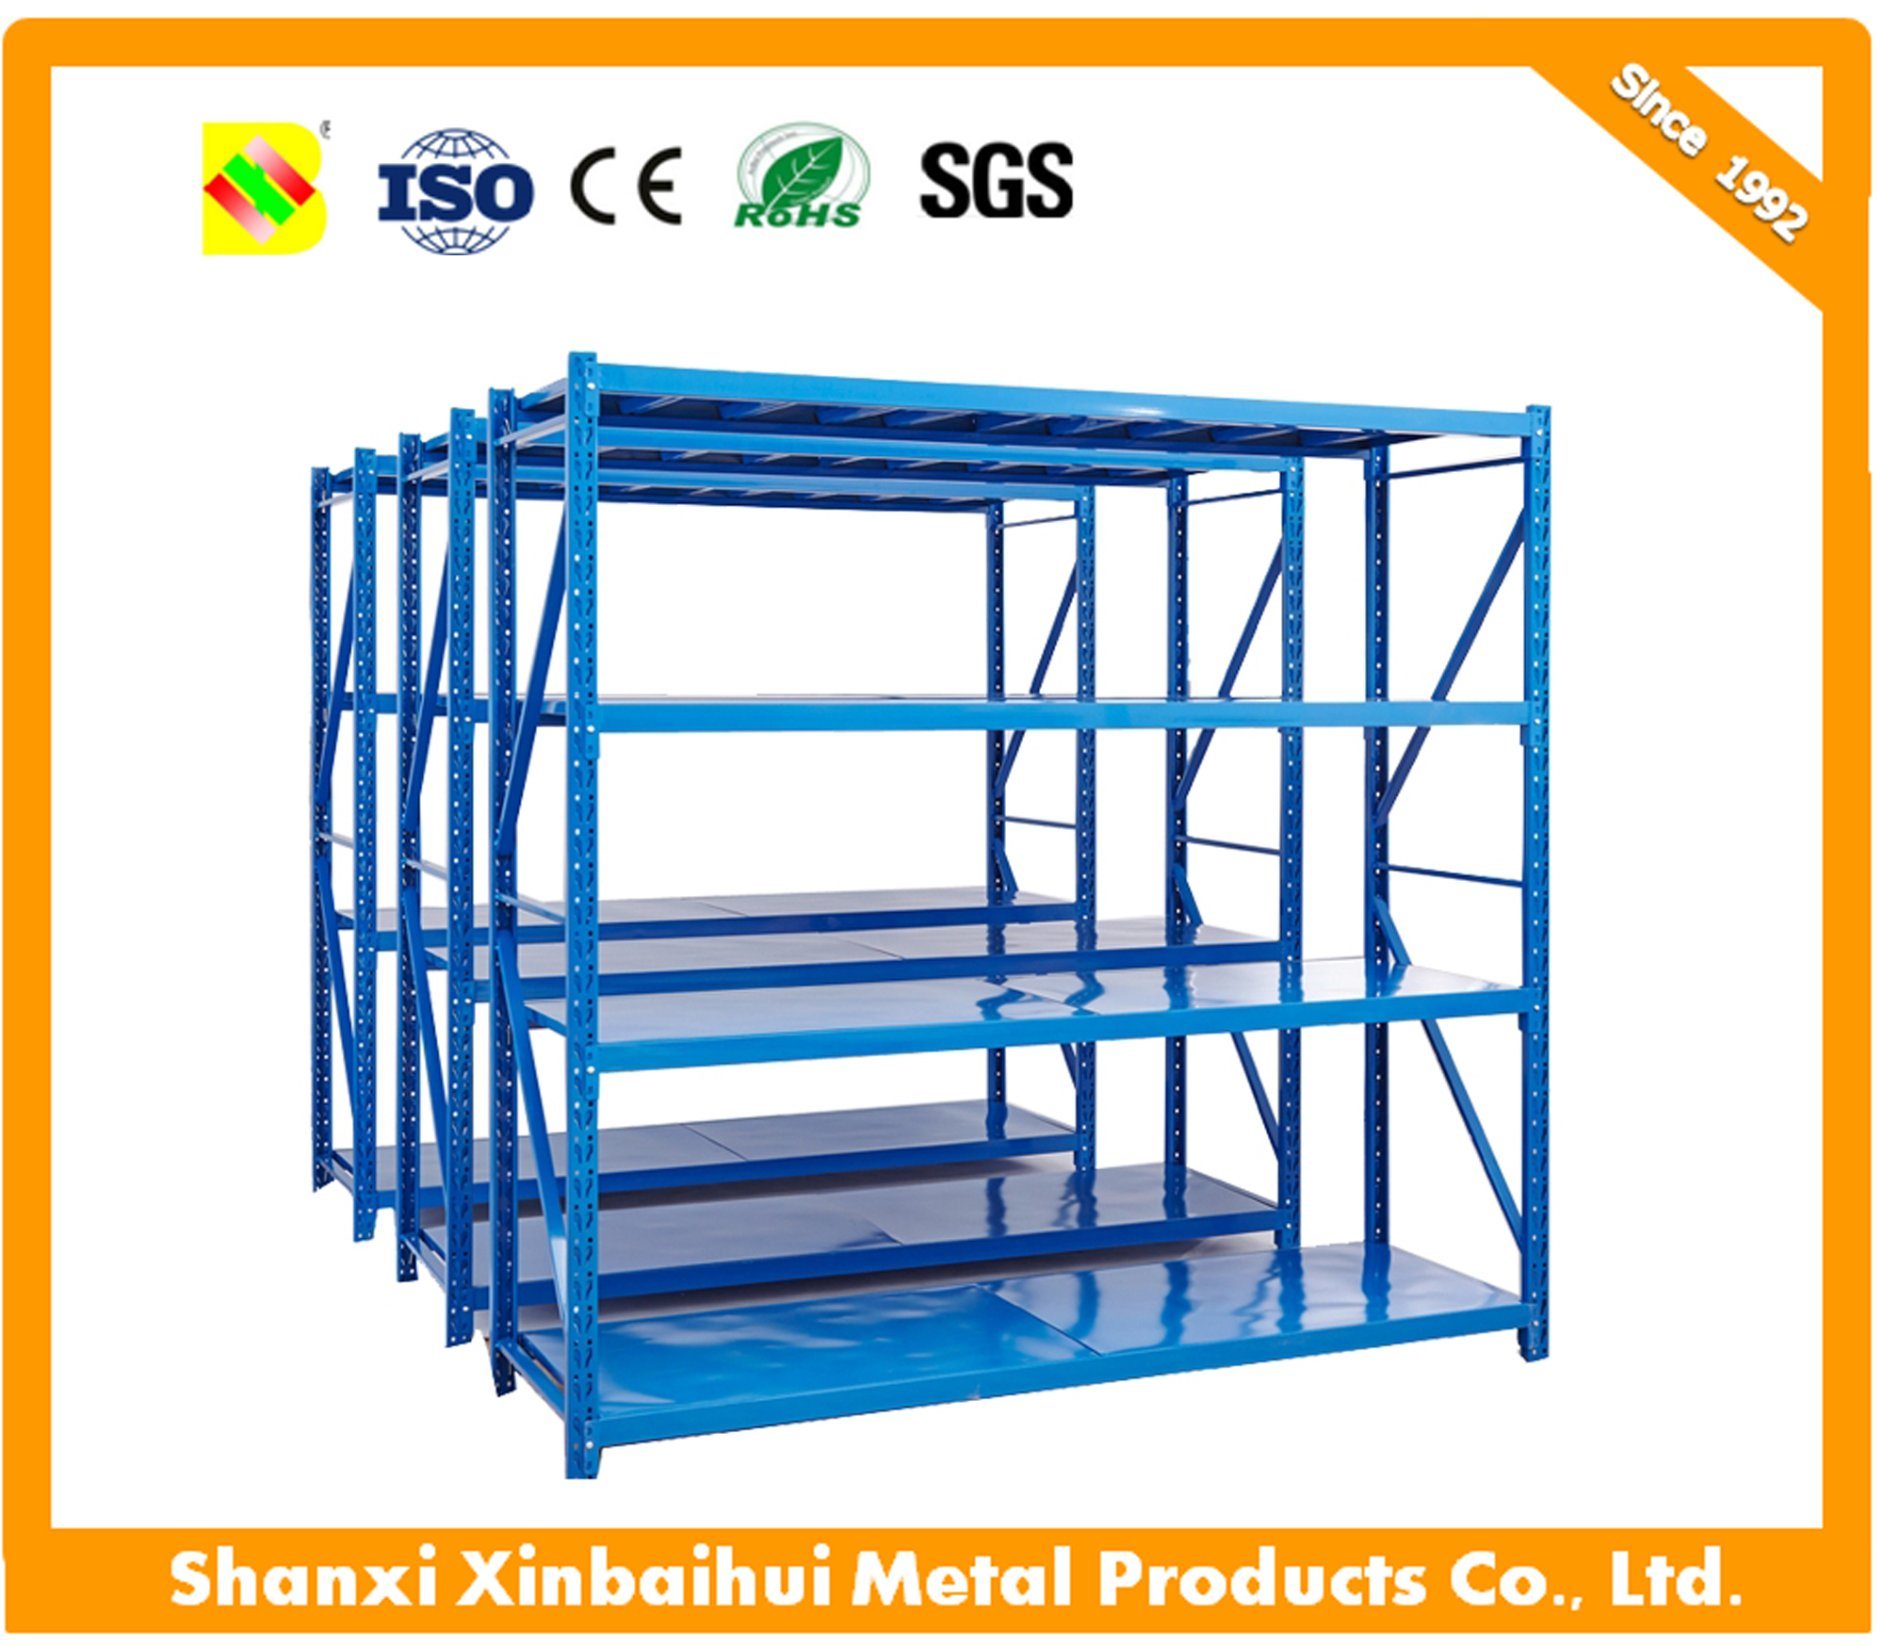 Heavy-Duty Storage Rack for Industrial Warehouse Storage Solutions